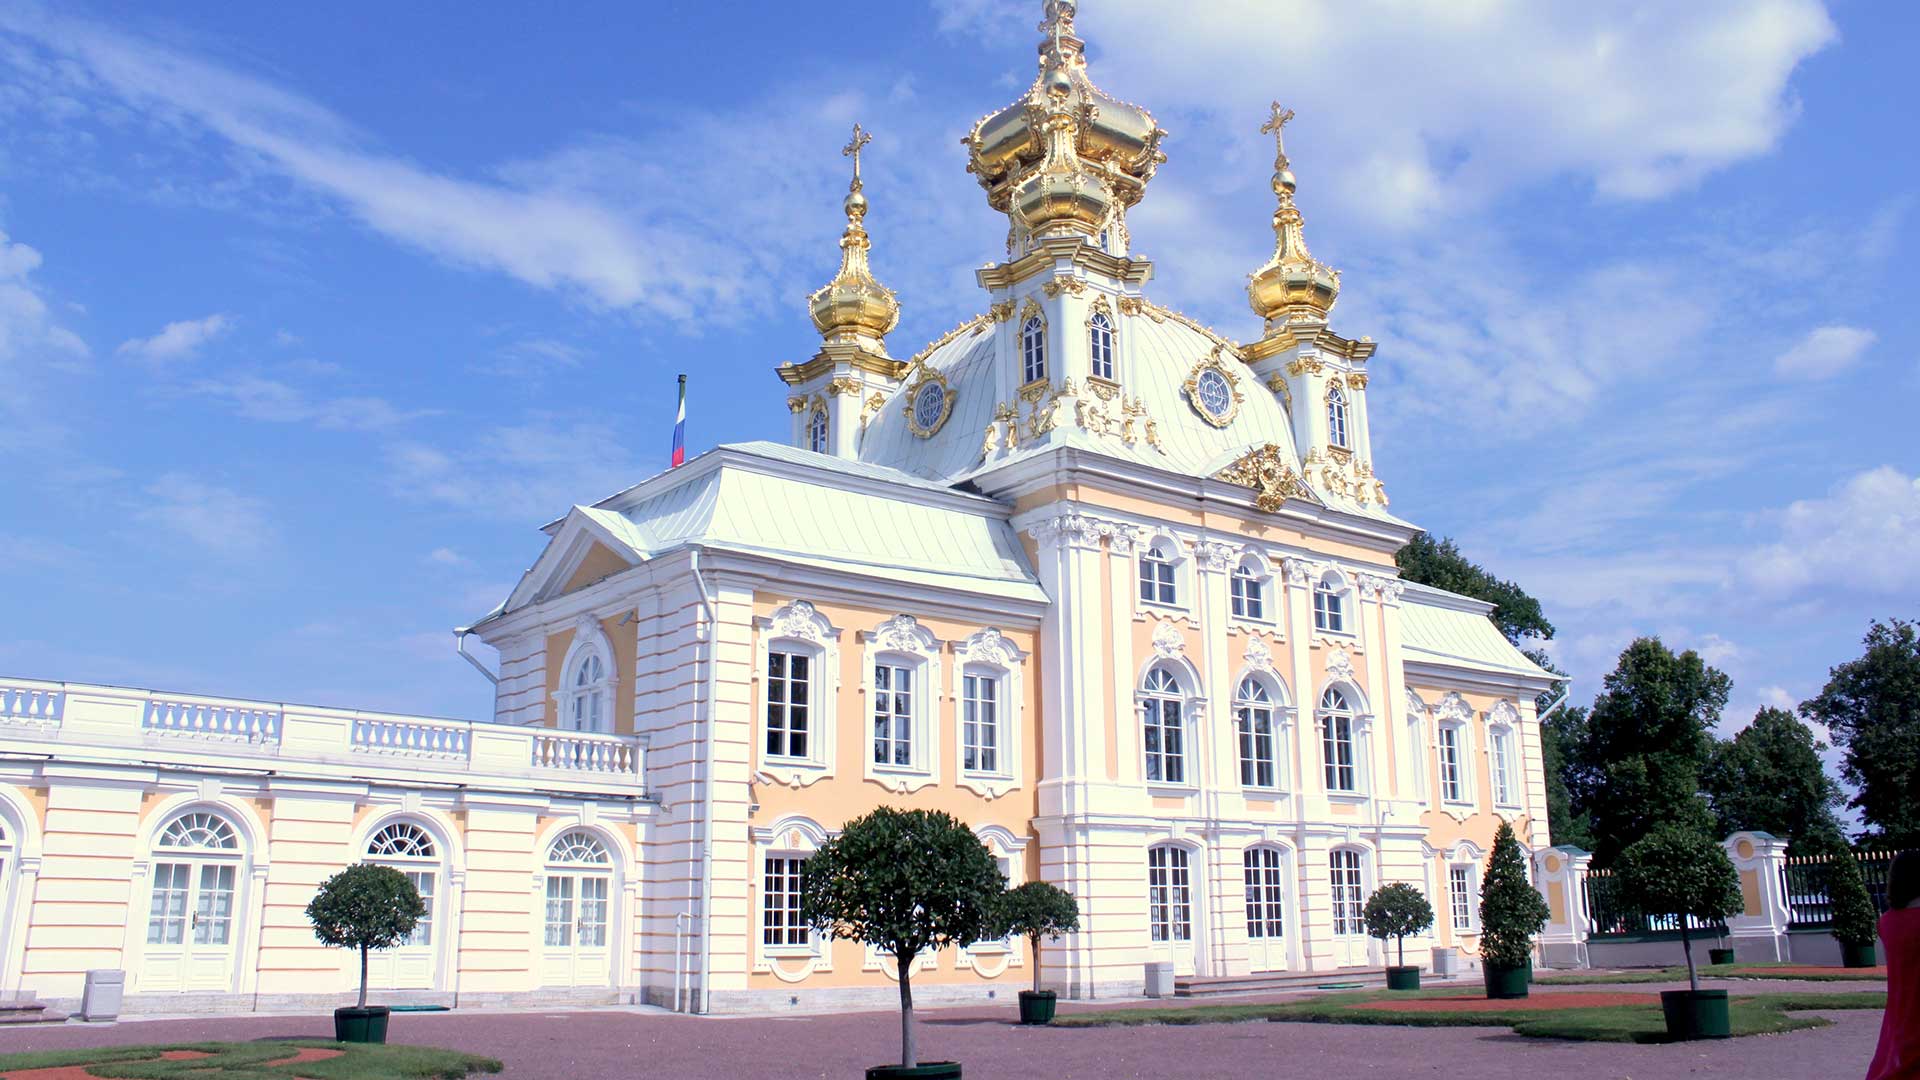 1-Day Tour in St. Petersburg, Russia - Friendly Local Guides